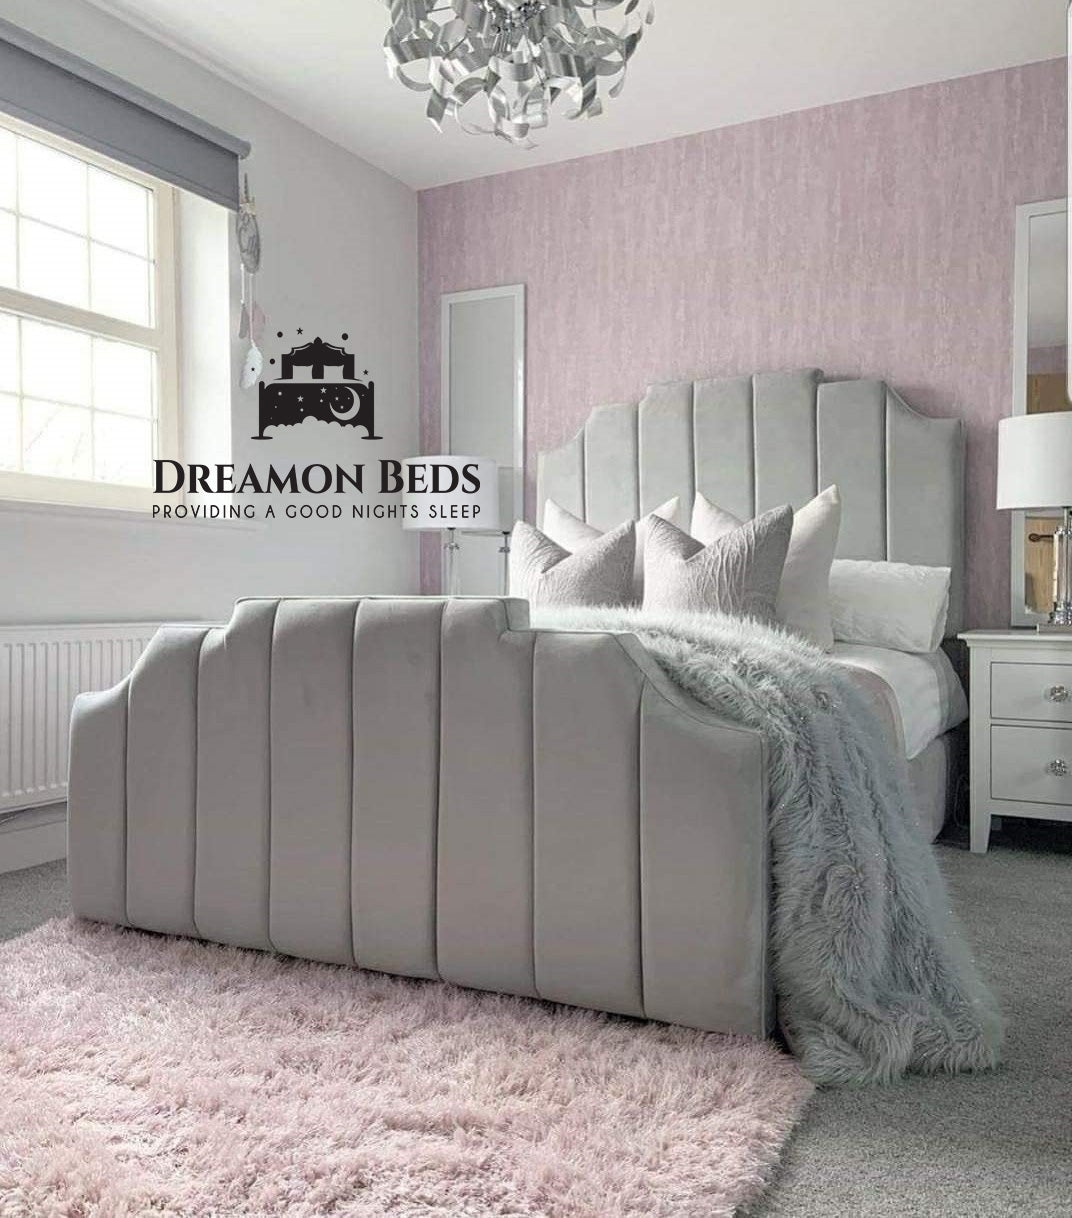 Hastings Art Deco Bed Frame – Endless Customisation – Choice Of 25 Colours & Materials – Dreamon Beds